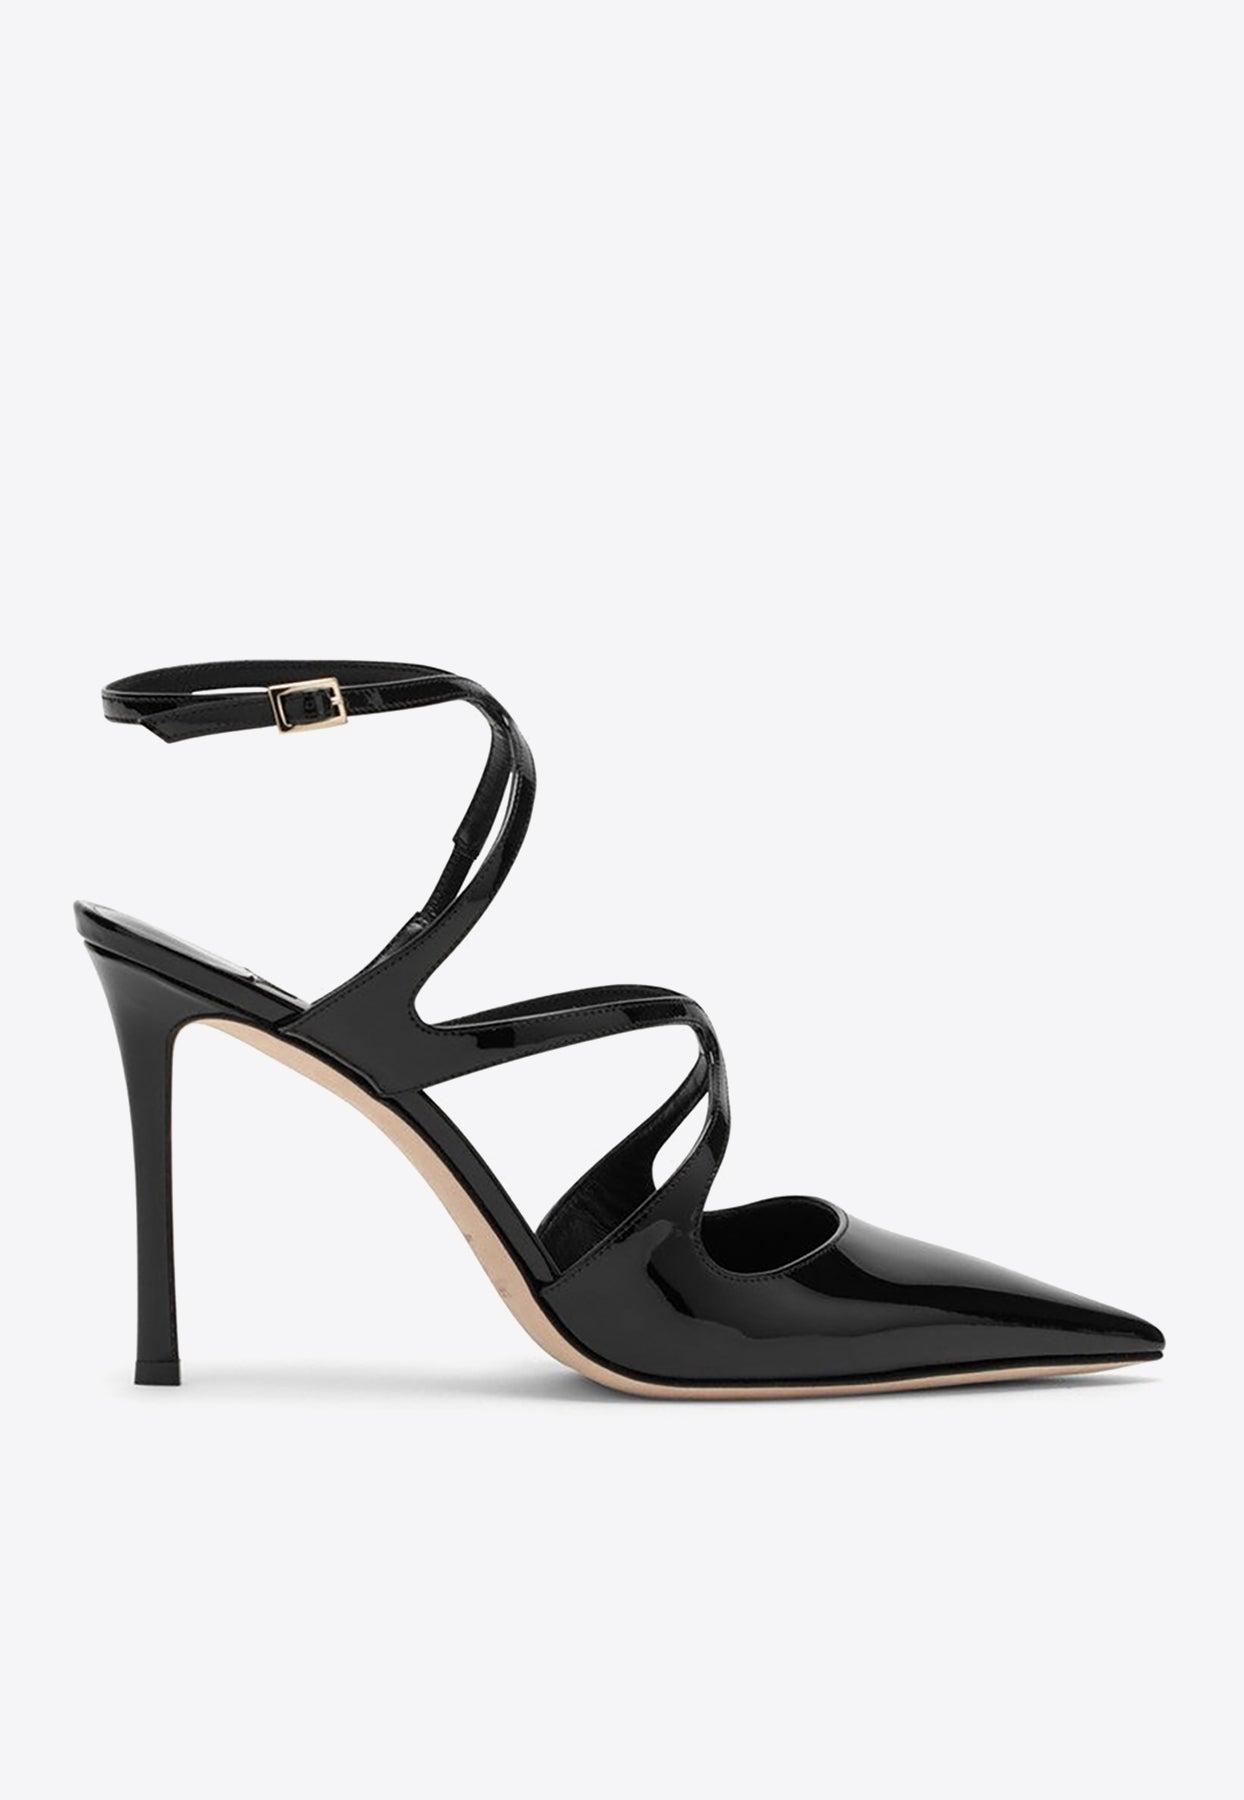 Jimmy Choo Azia 95 Slingback Pumps In Patent Leather in Black | Lyst